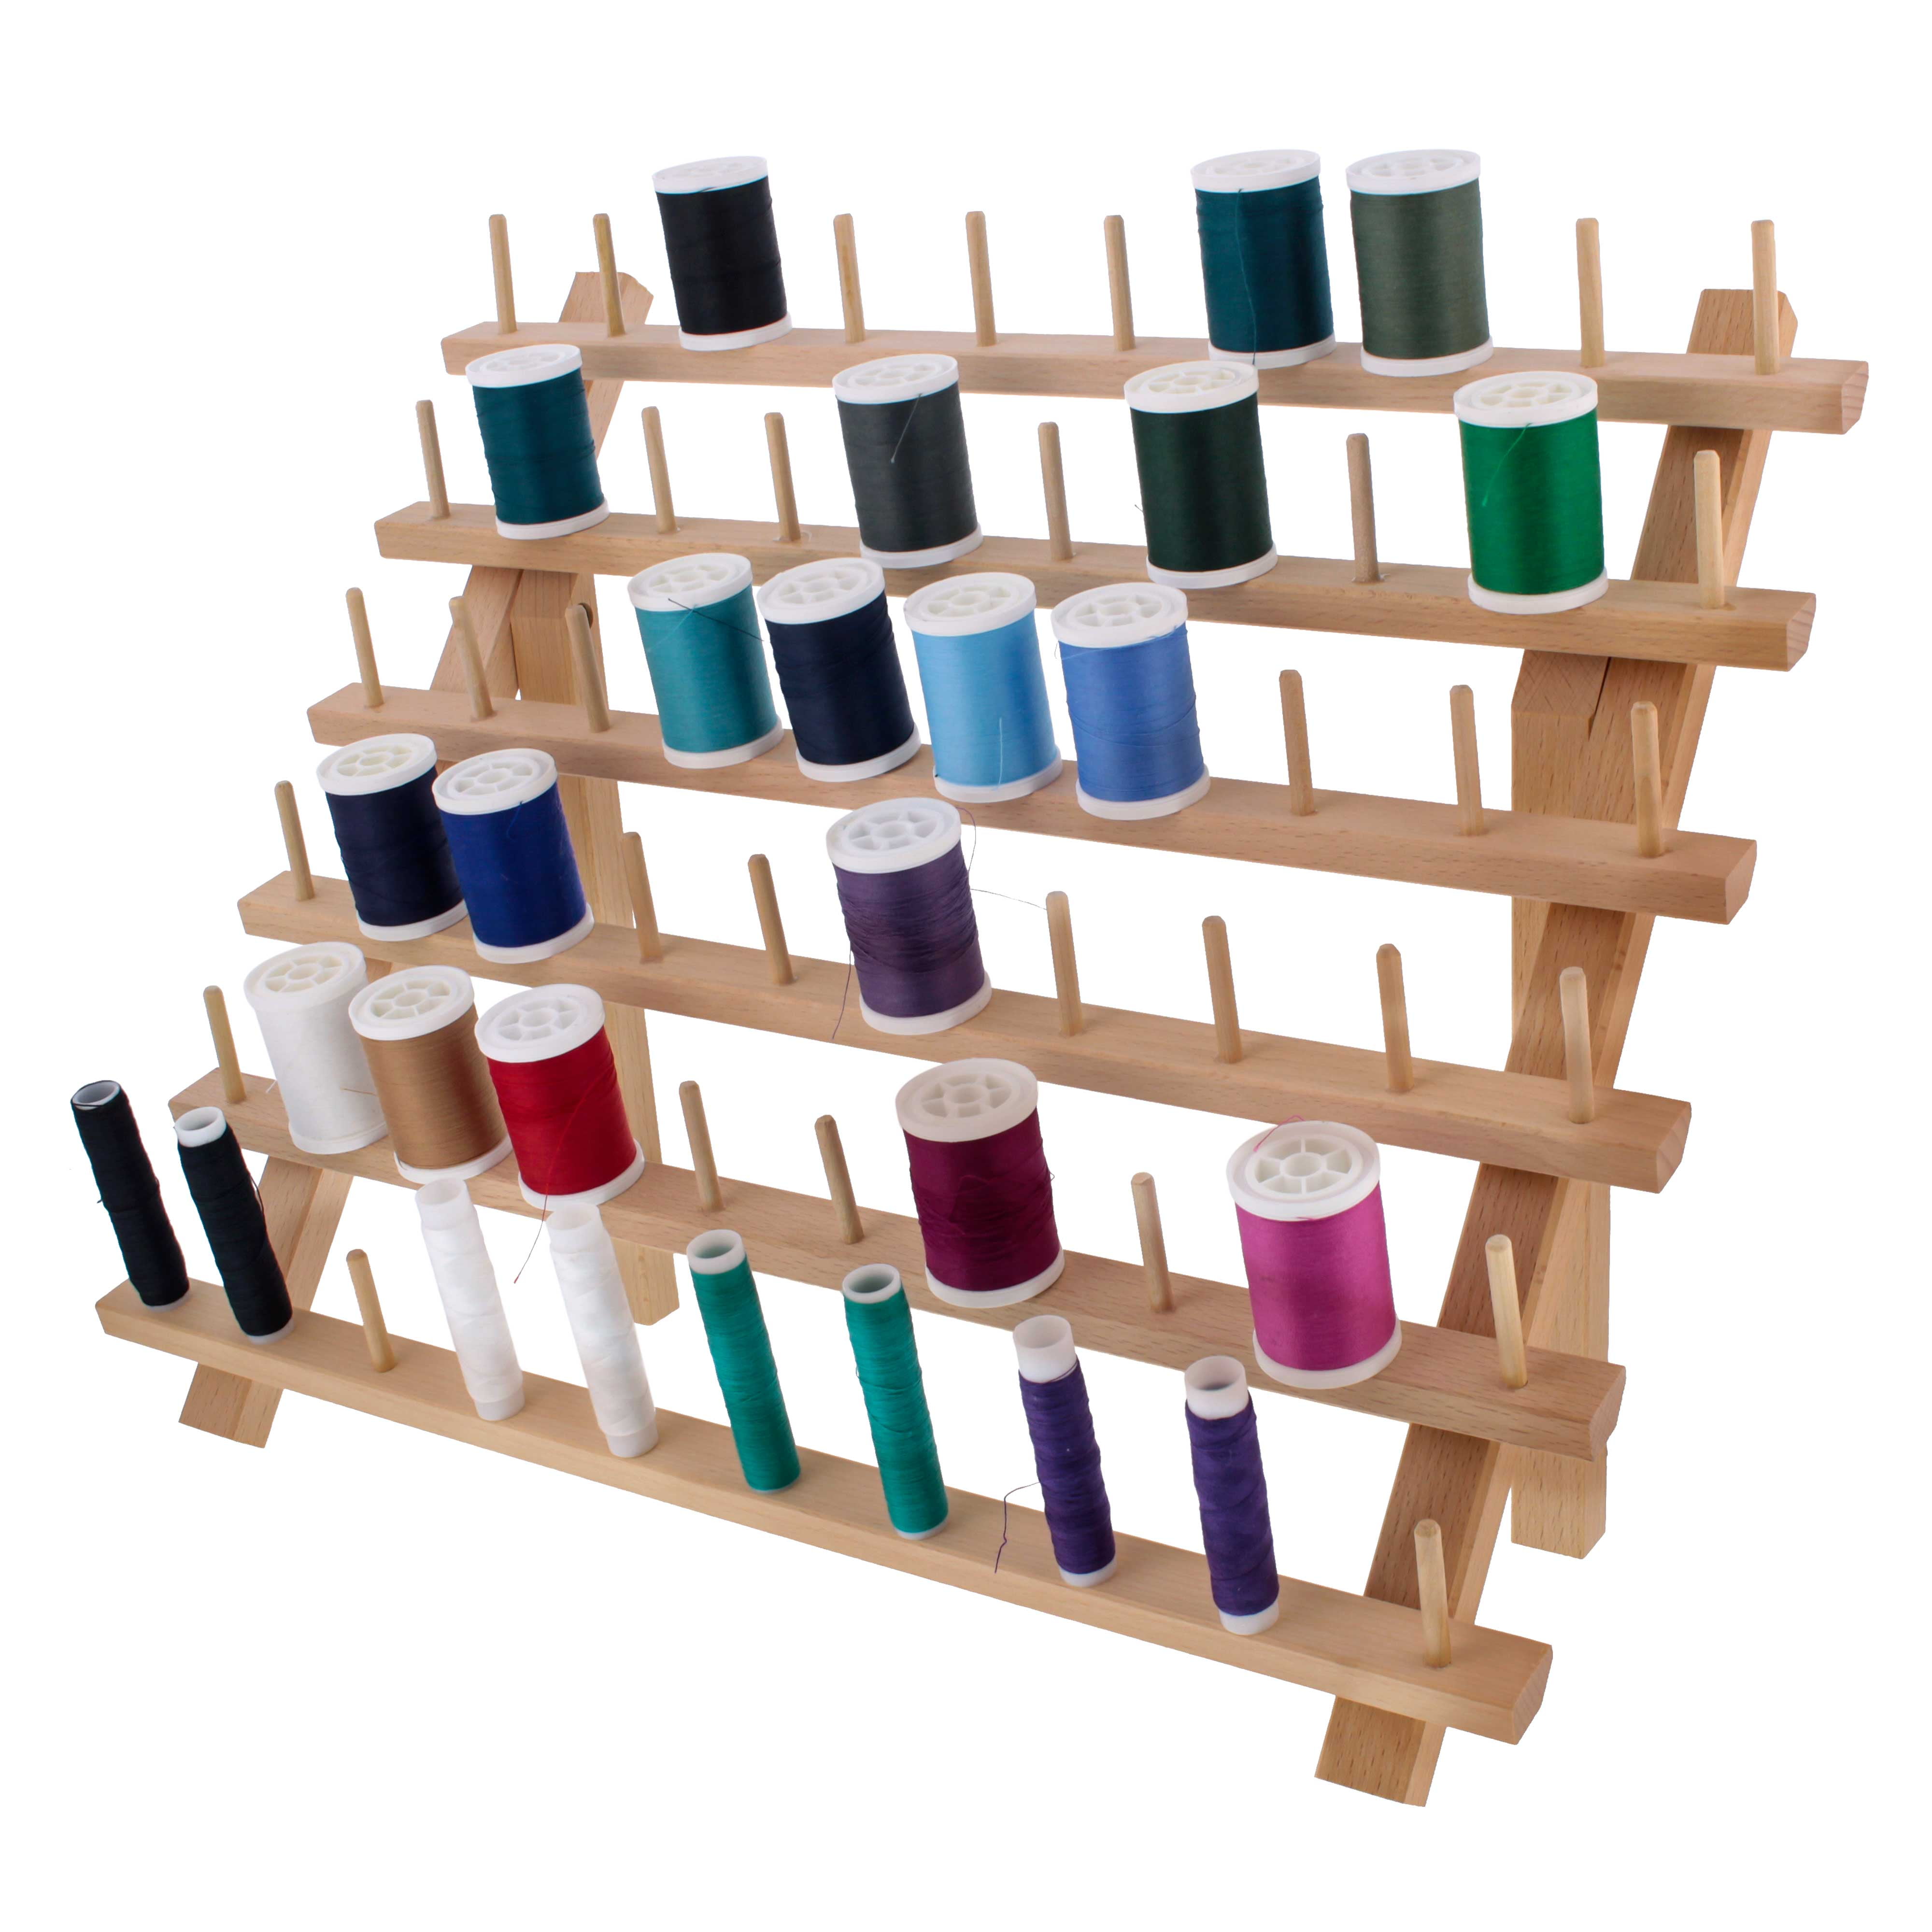 60pcs Assorted Colors Sewing Thread Spools Storage Organizer Holder Re 